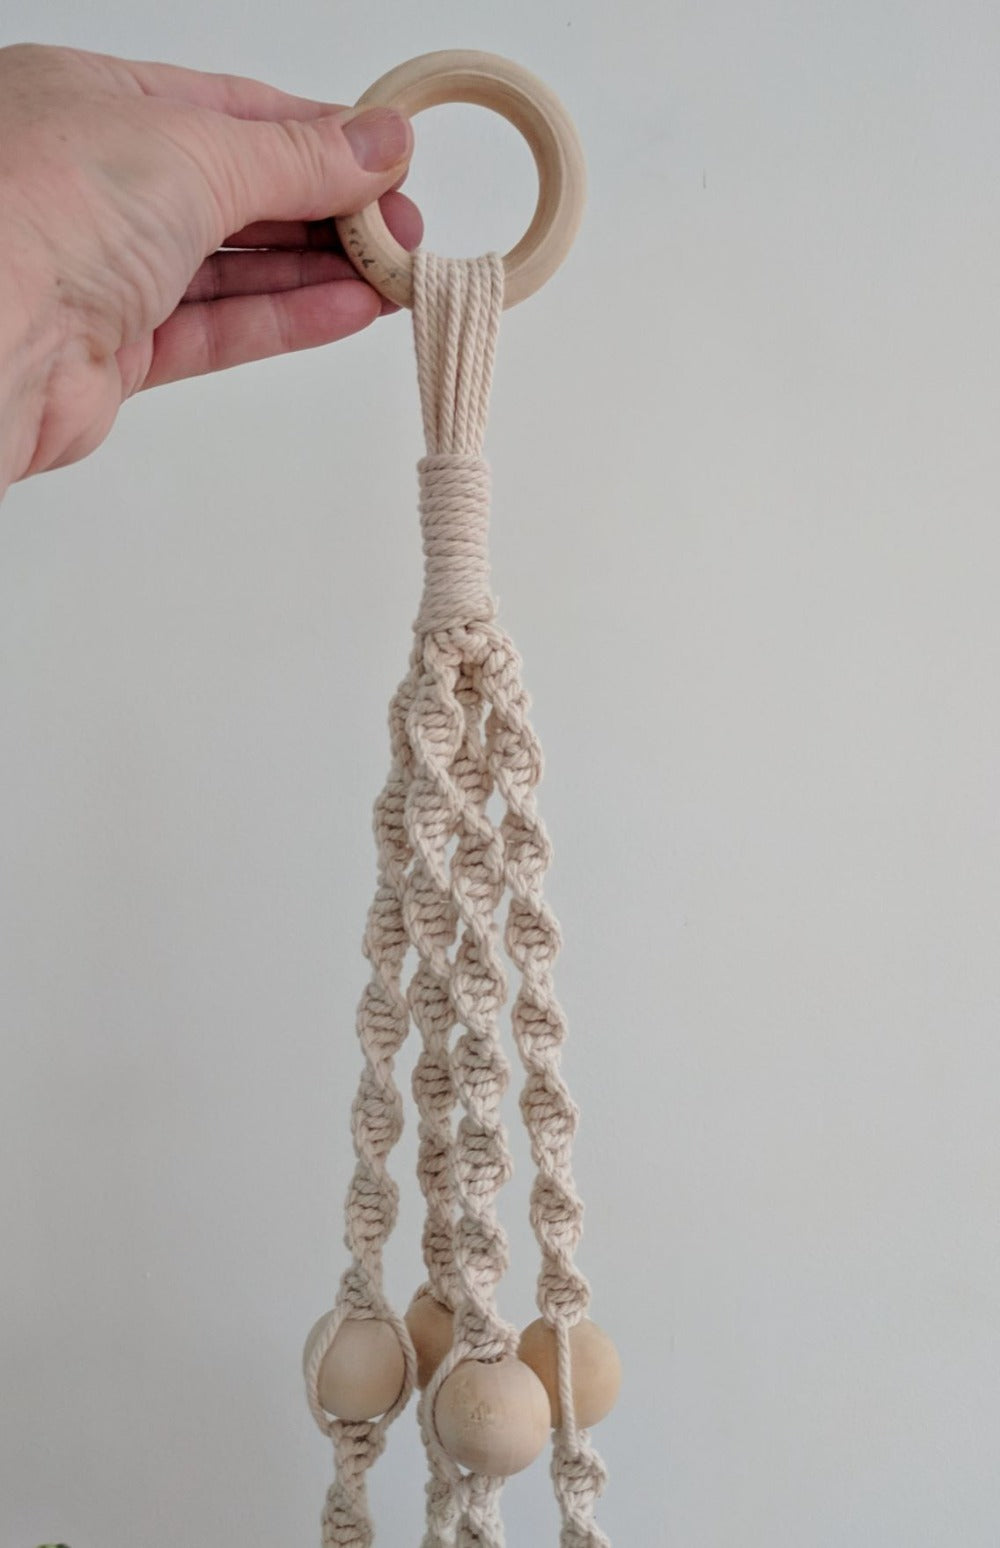 Learn macrame knots with our DIY macrame plant hanger kit